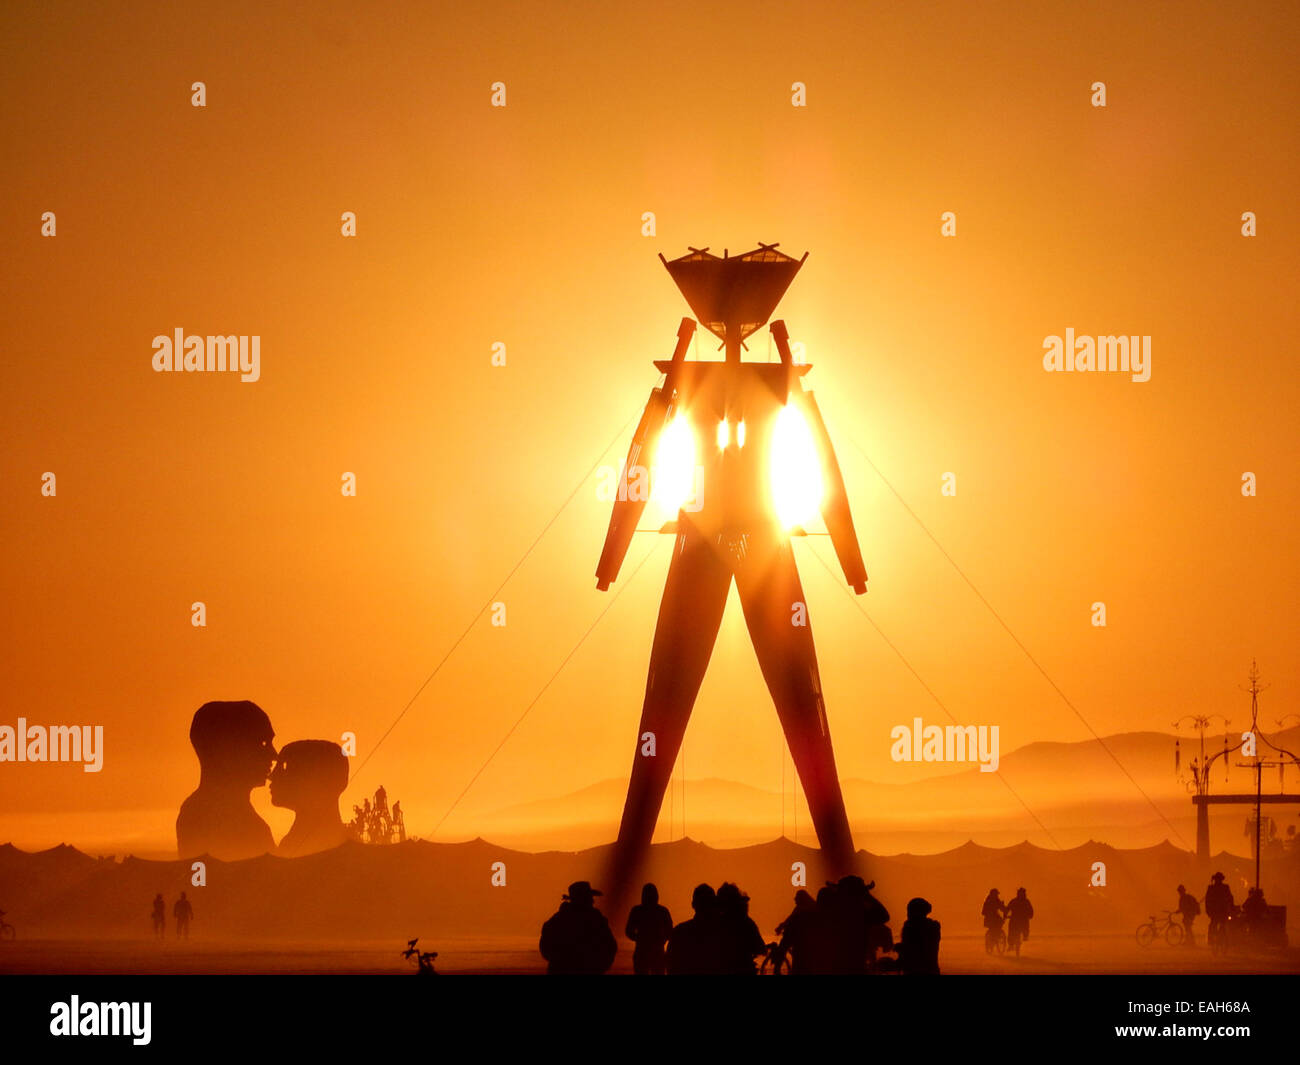 Sunset over the Burning Man statue on the playa at the annual Burning Man festival in the desert August 26, 2014 in Black Rock City, Nevada. Stock Photo